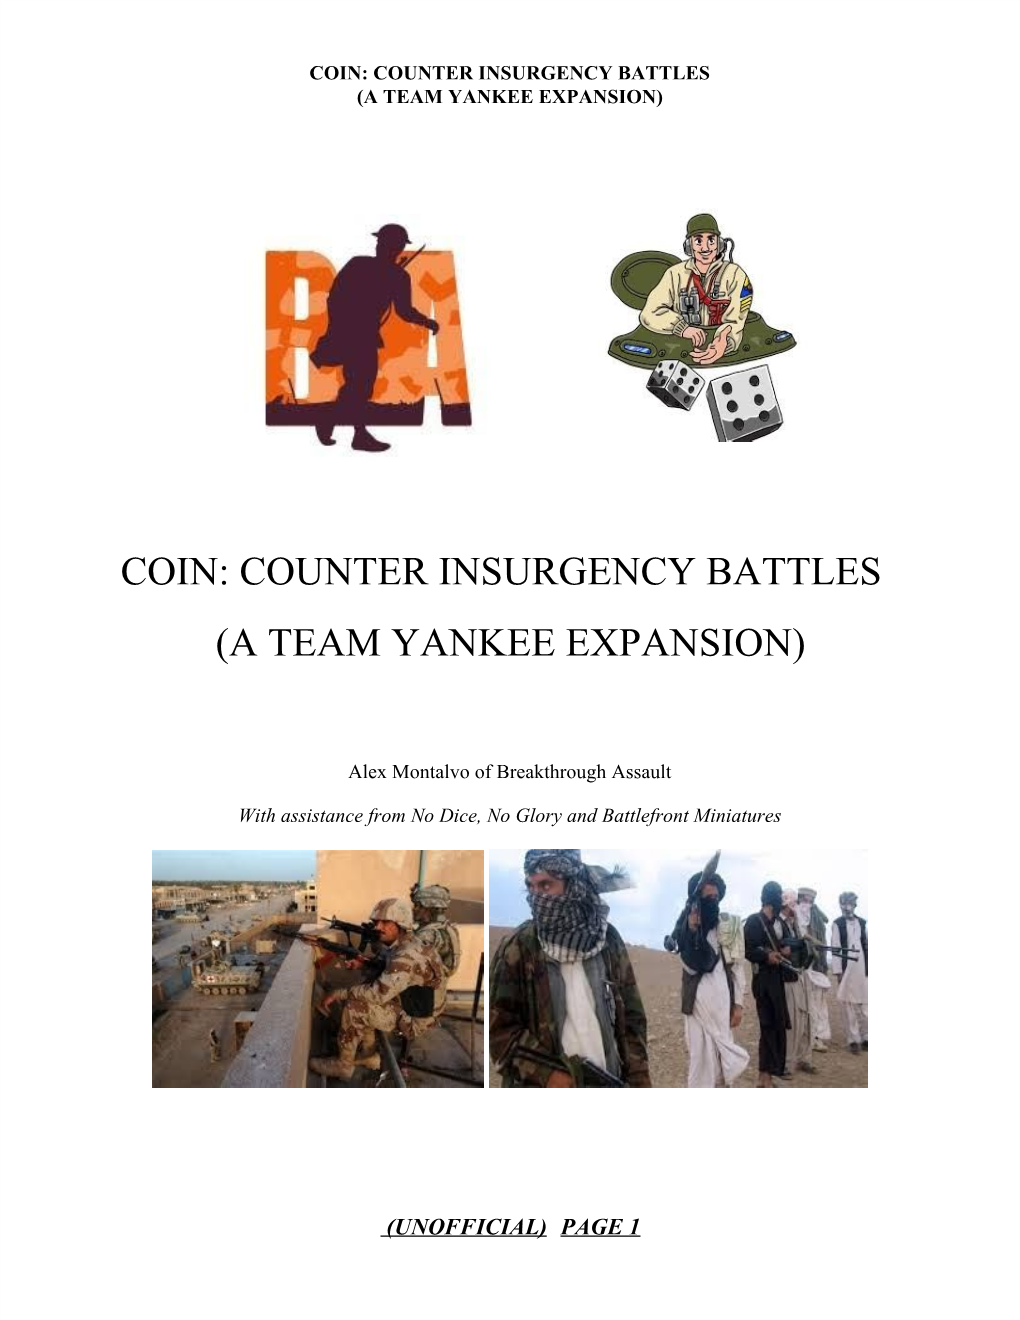 Coin: Counter Insurgency Battles (A Team Yankee Expansion)